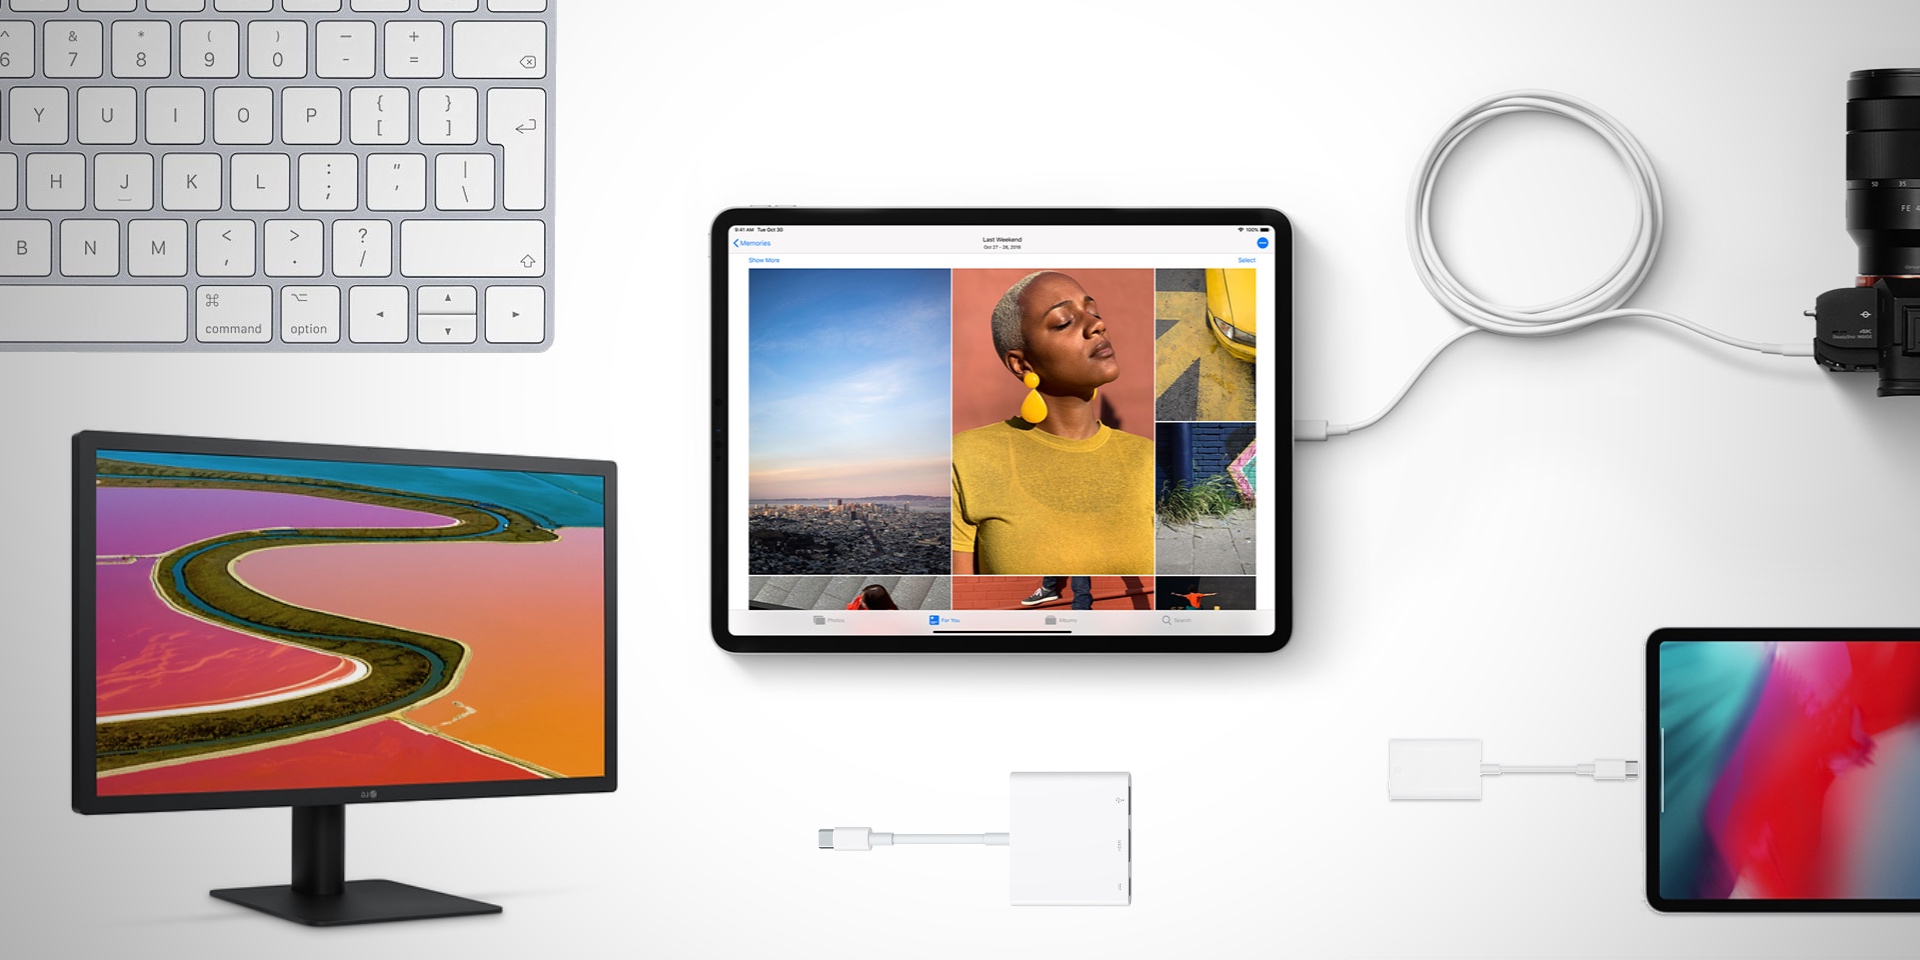 What can connect the new Pro with USB-C? - 9to5Mac